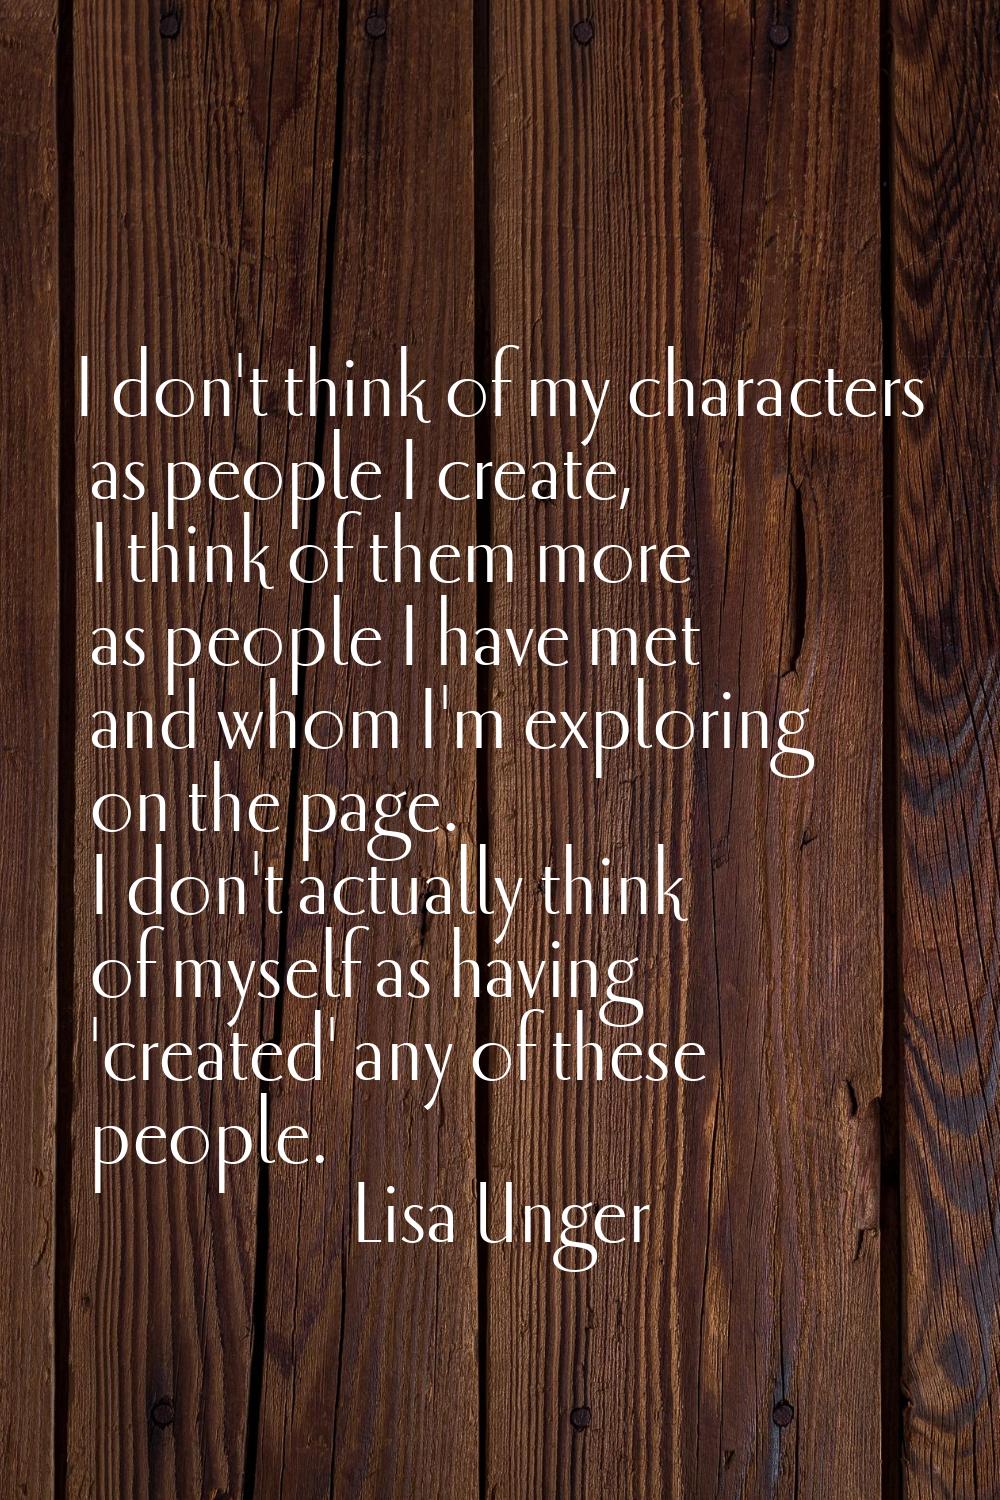 I don't think of my characters as people I create, I think of them more as people I have met and wh